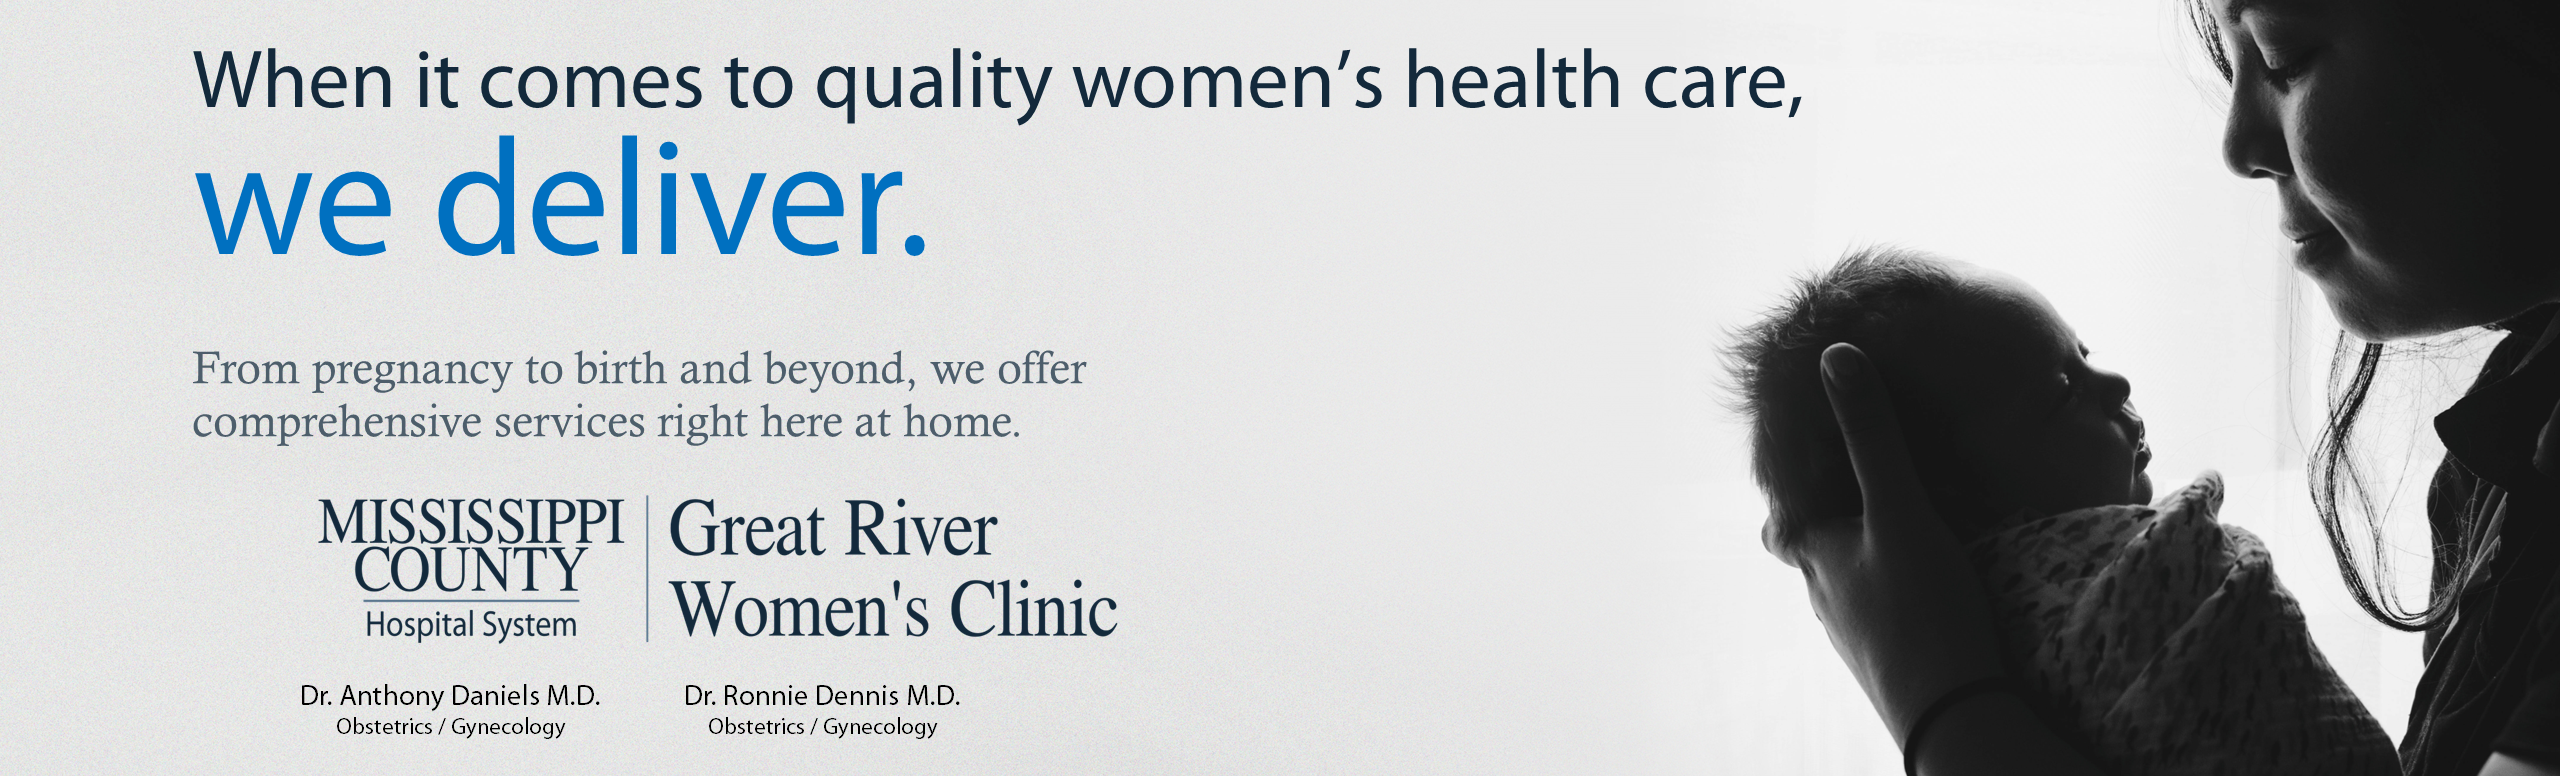 Banner picture of a mother holding her newborn baby looking down at him/her. Banner says:

When it comes to quality women's health care,
we deliver.

From pregnancy to birth and beyond, we offer comprehensive services right here at home.

MISSISSIPPI COUNTY Hospital System
Great River Women's Clinic
A Service of Great River Medical Center

870-838-7277
1100 Medical Drive, Blytheville AR

Dr. Anthony Daniels M.D.
Obstetrics/ Gynecology

Dr. Ronnie Dennis M.D.
Obstetrics/ Gynecology

Paige Vaughn, APRN